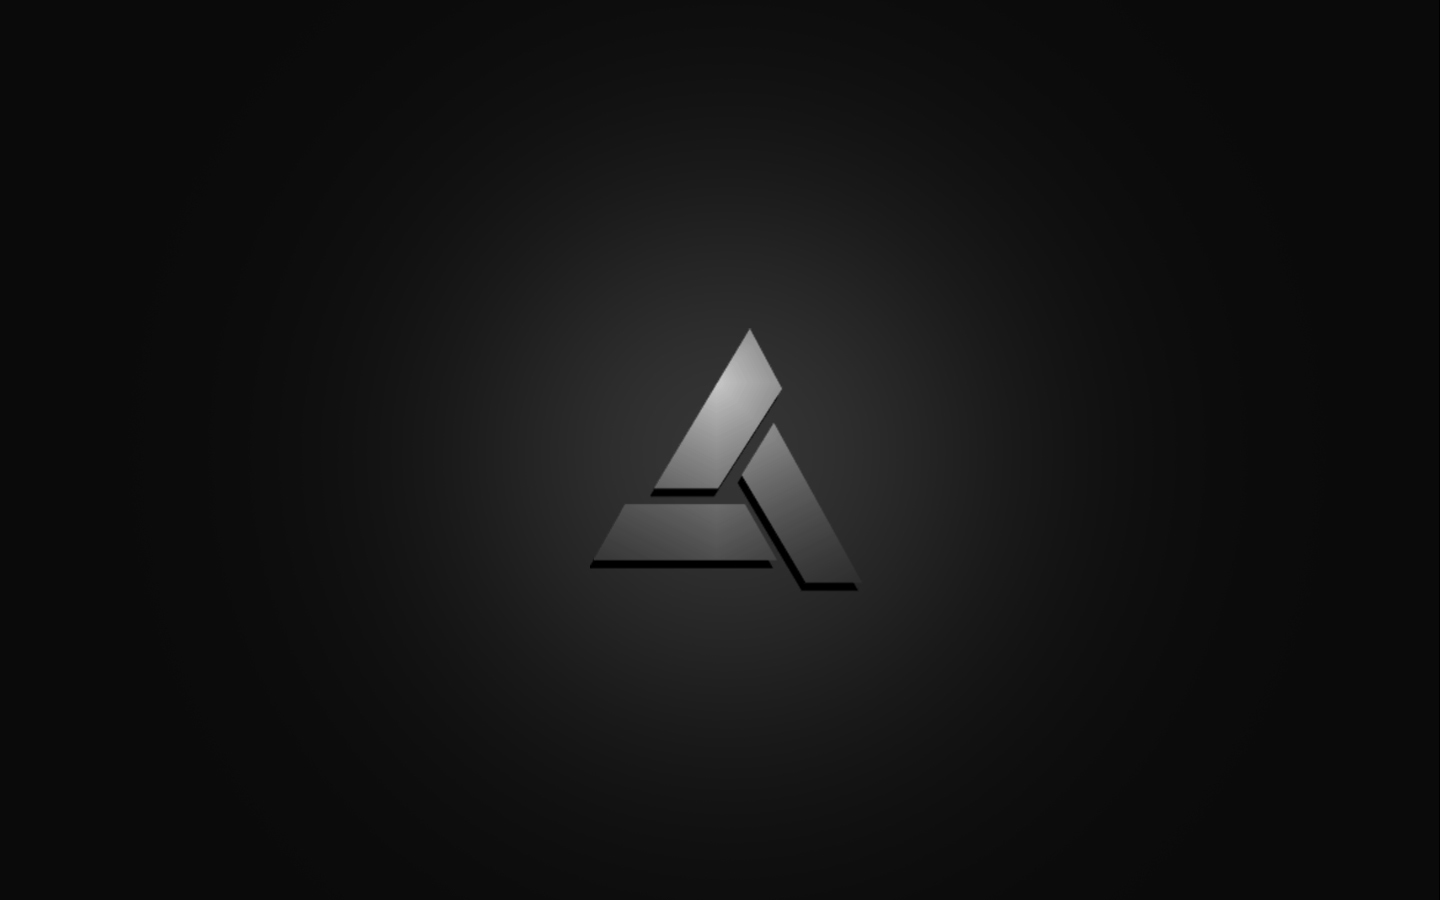 assassin's creed, games, black, logos, background